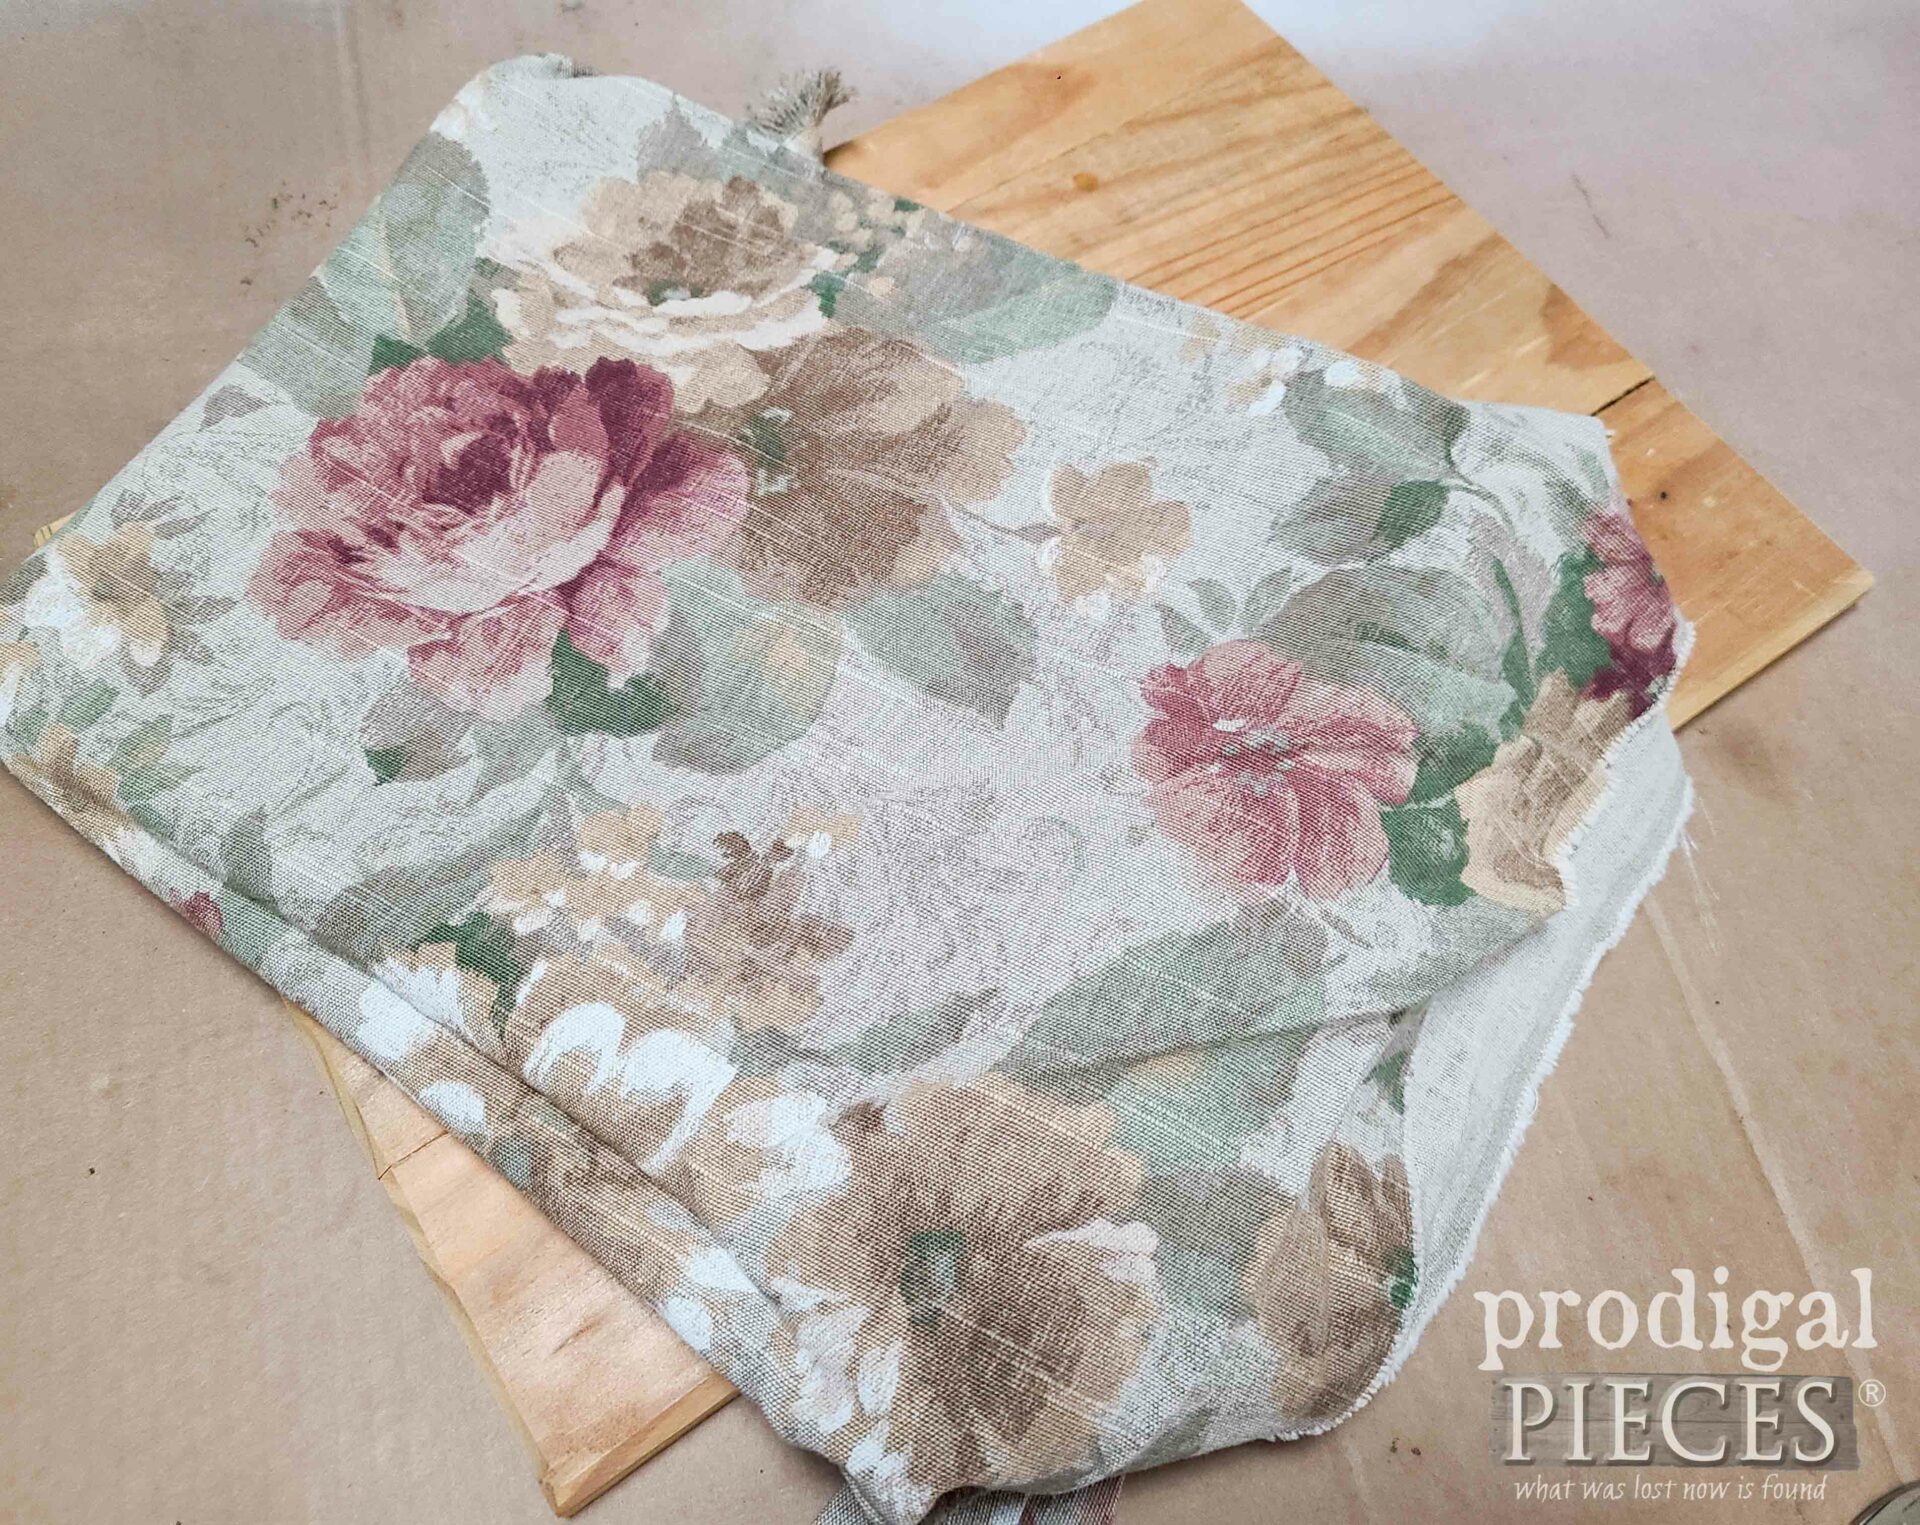 Beautiful Rose Upholstery for Footstool Makeover | prodigalpieces.com #prodigalpieces